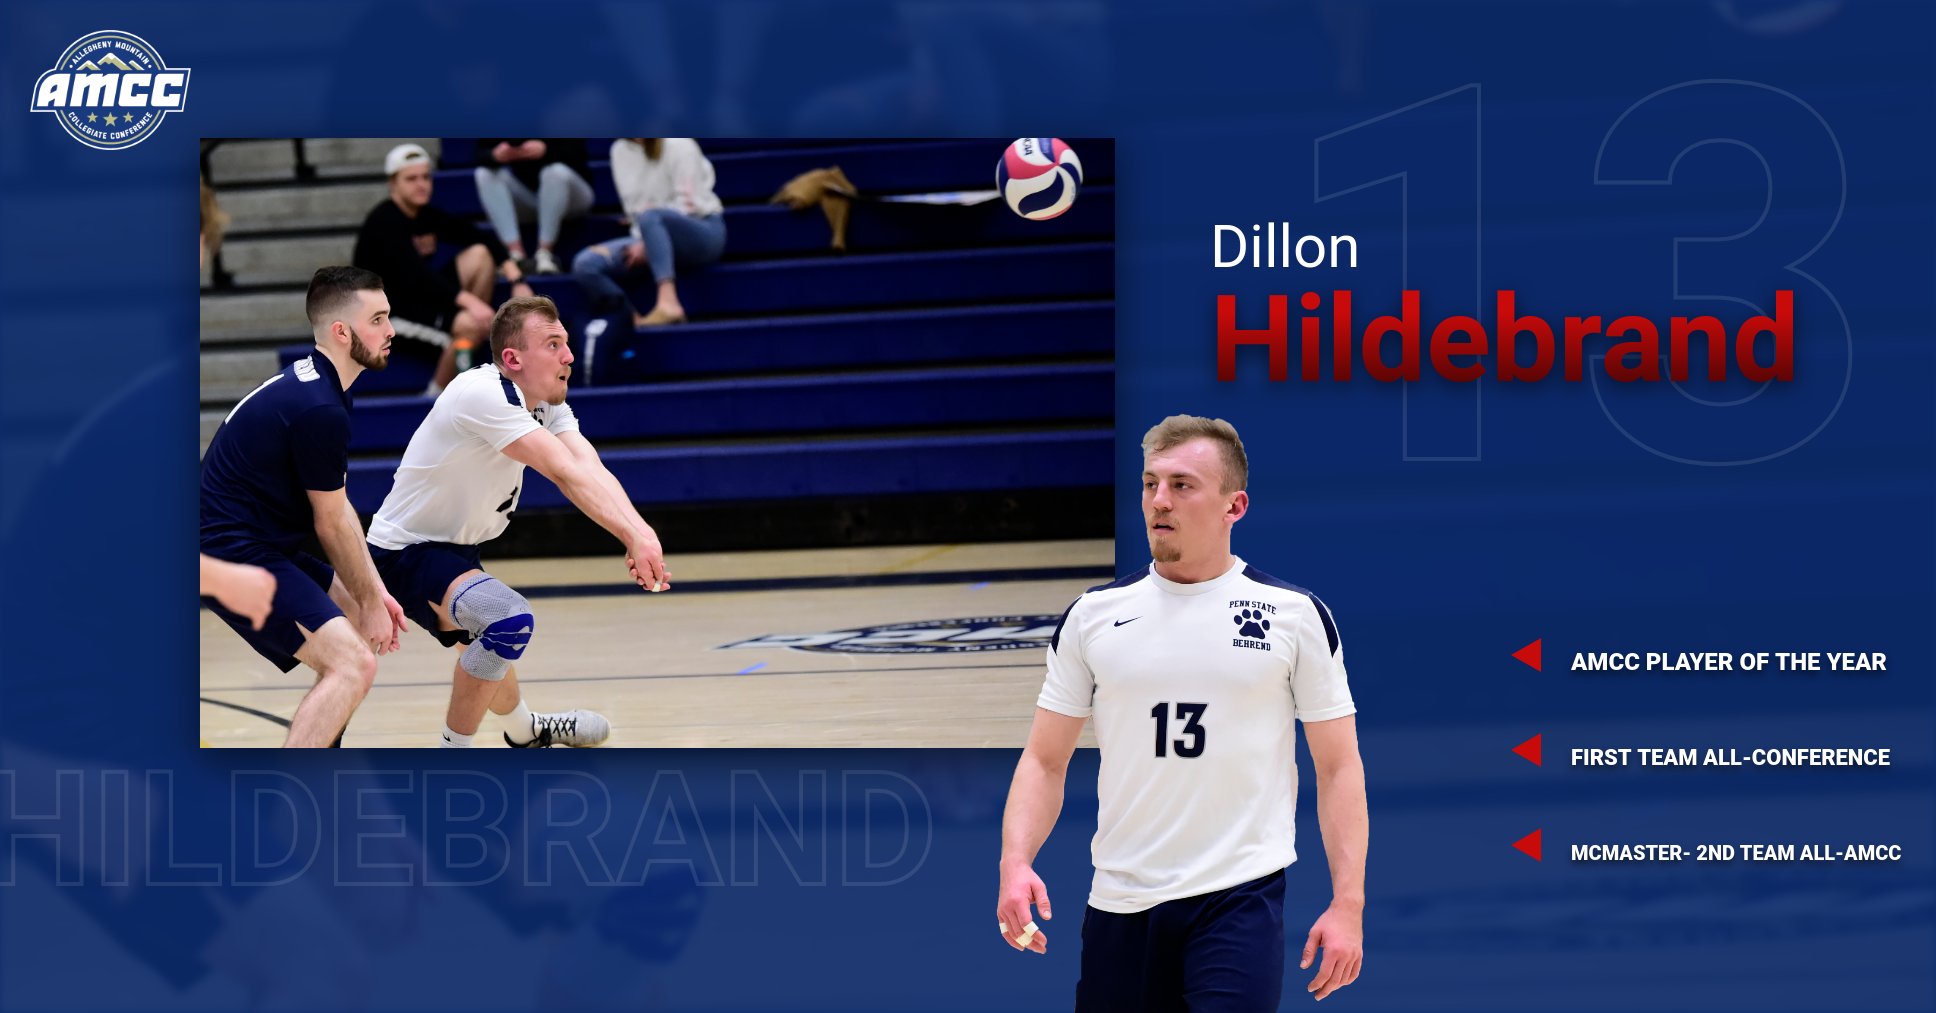 Hildebrand Named AMCC Player of the Year; McMaster Earns All-AMCC Honors